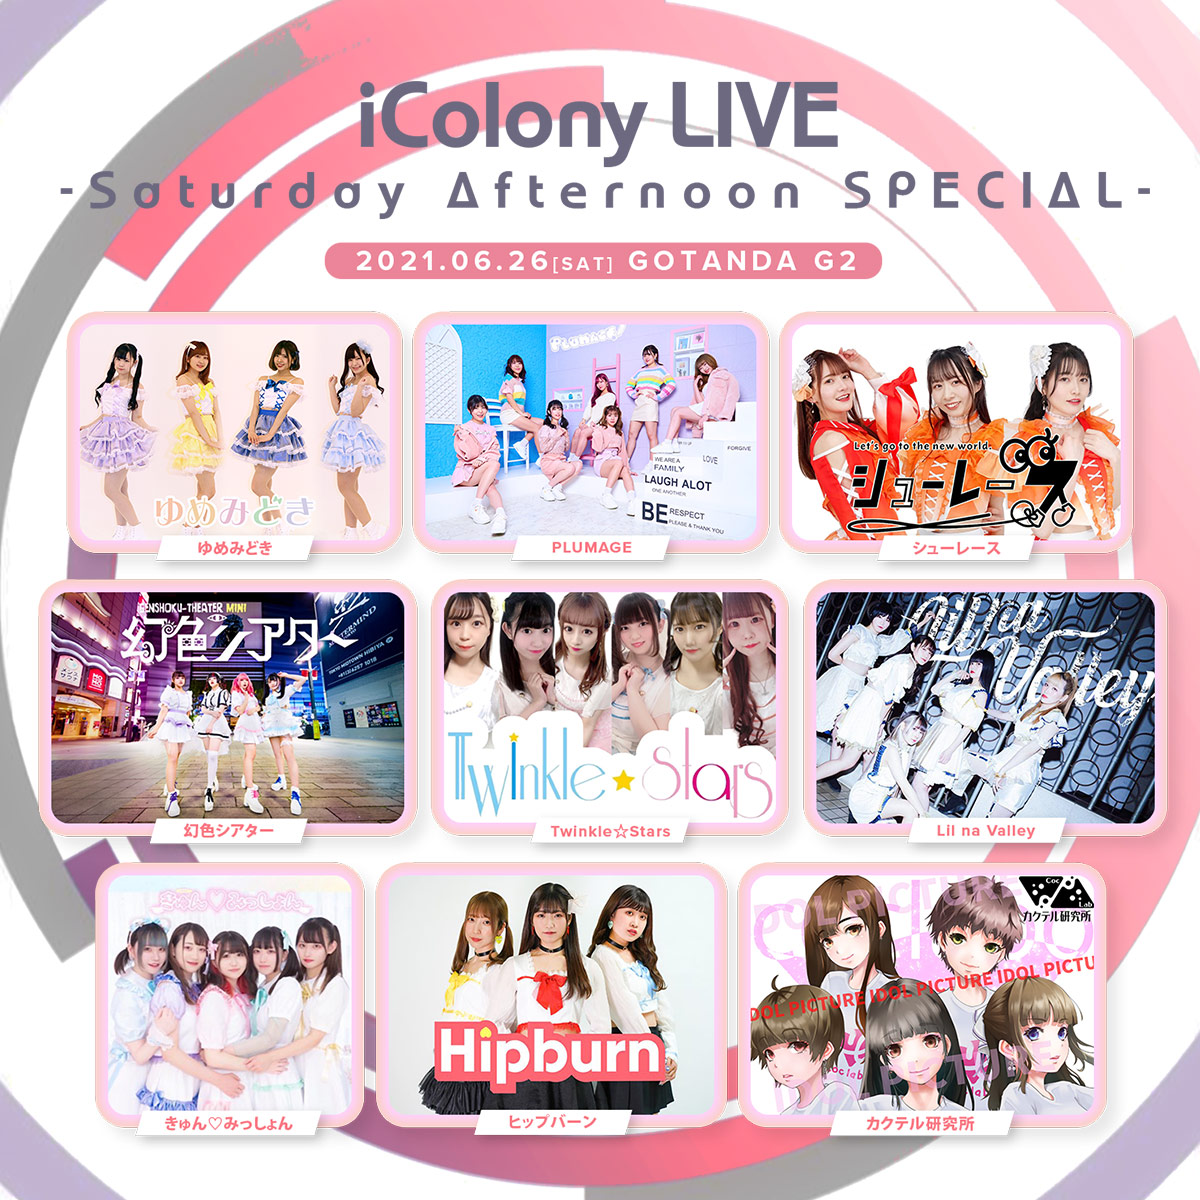 iColony LIVE - Saturday Afternoon SPECIAL -